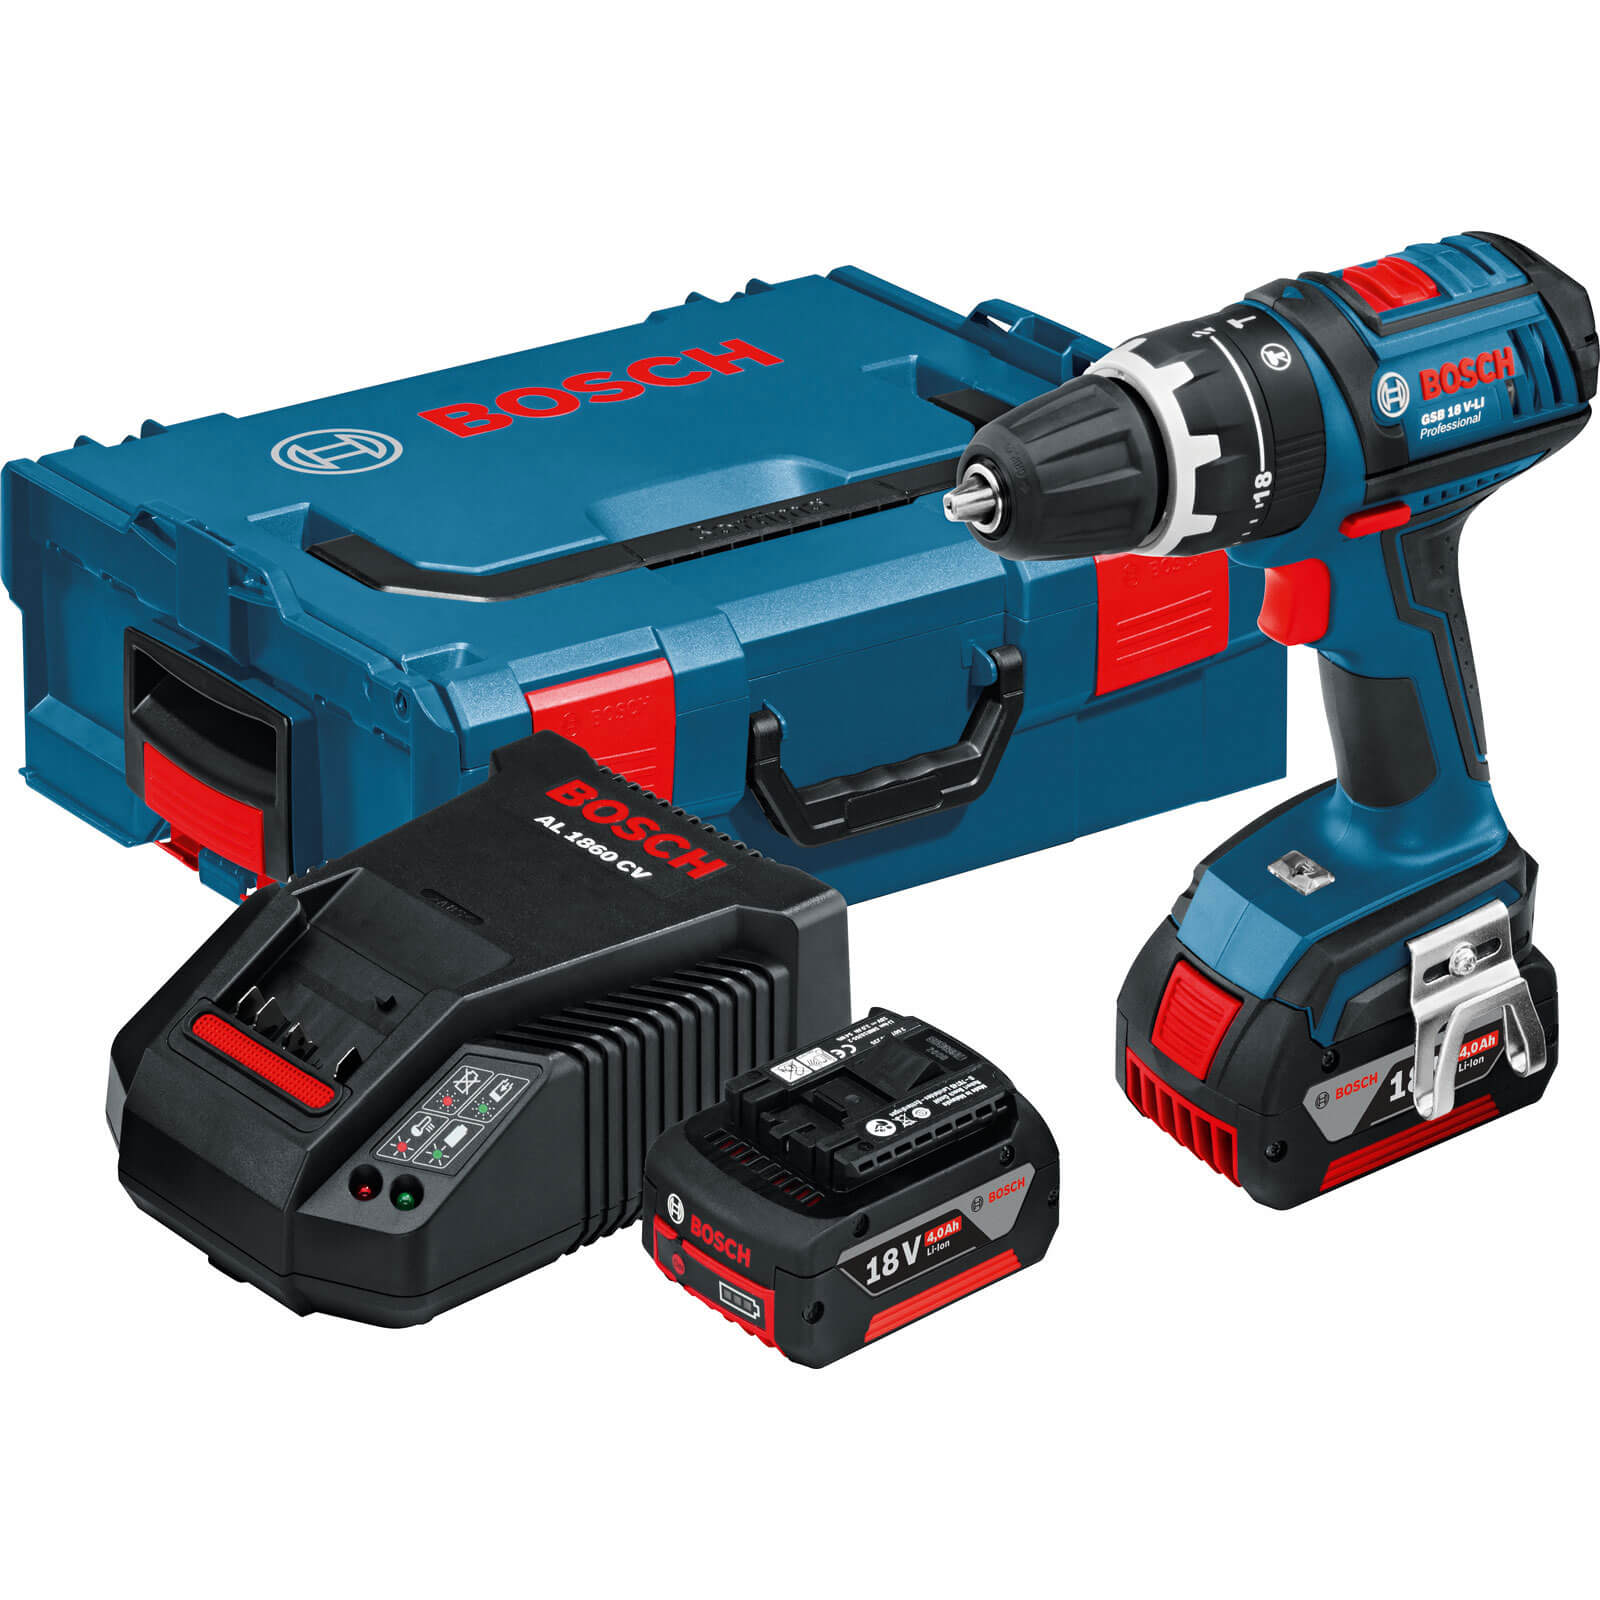 Bosch GSB 18 V-LI 18v Cordless Dynamicseries 2 Speed Combi Drill with 2 Lithium Ion Batteries 4ah + 